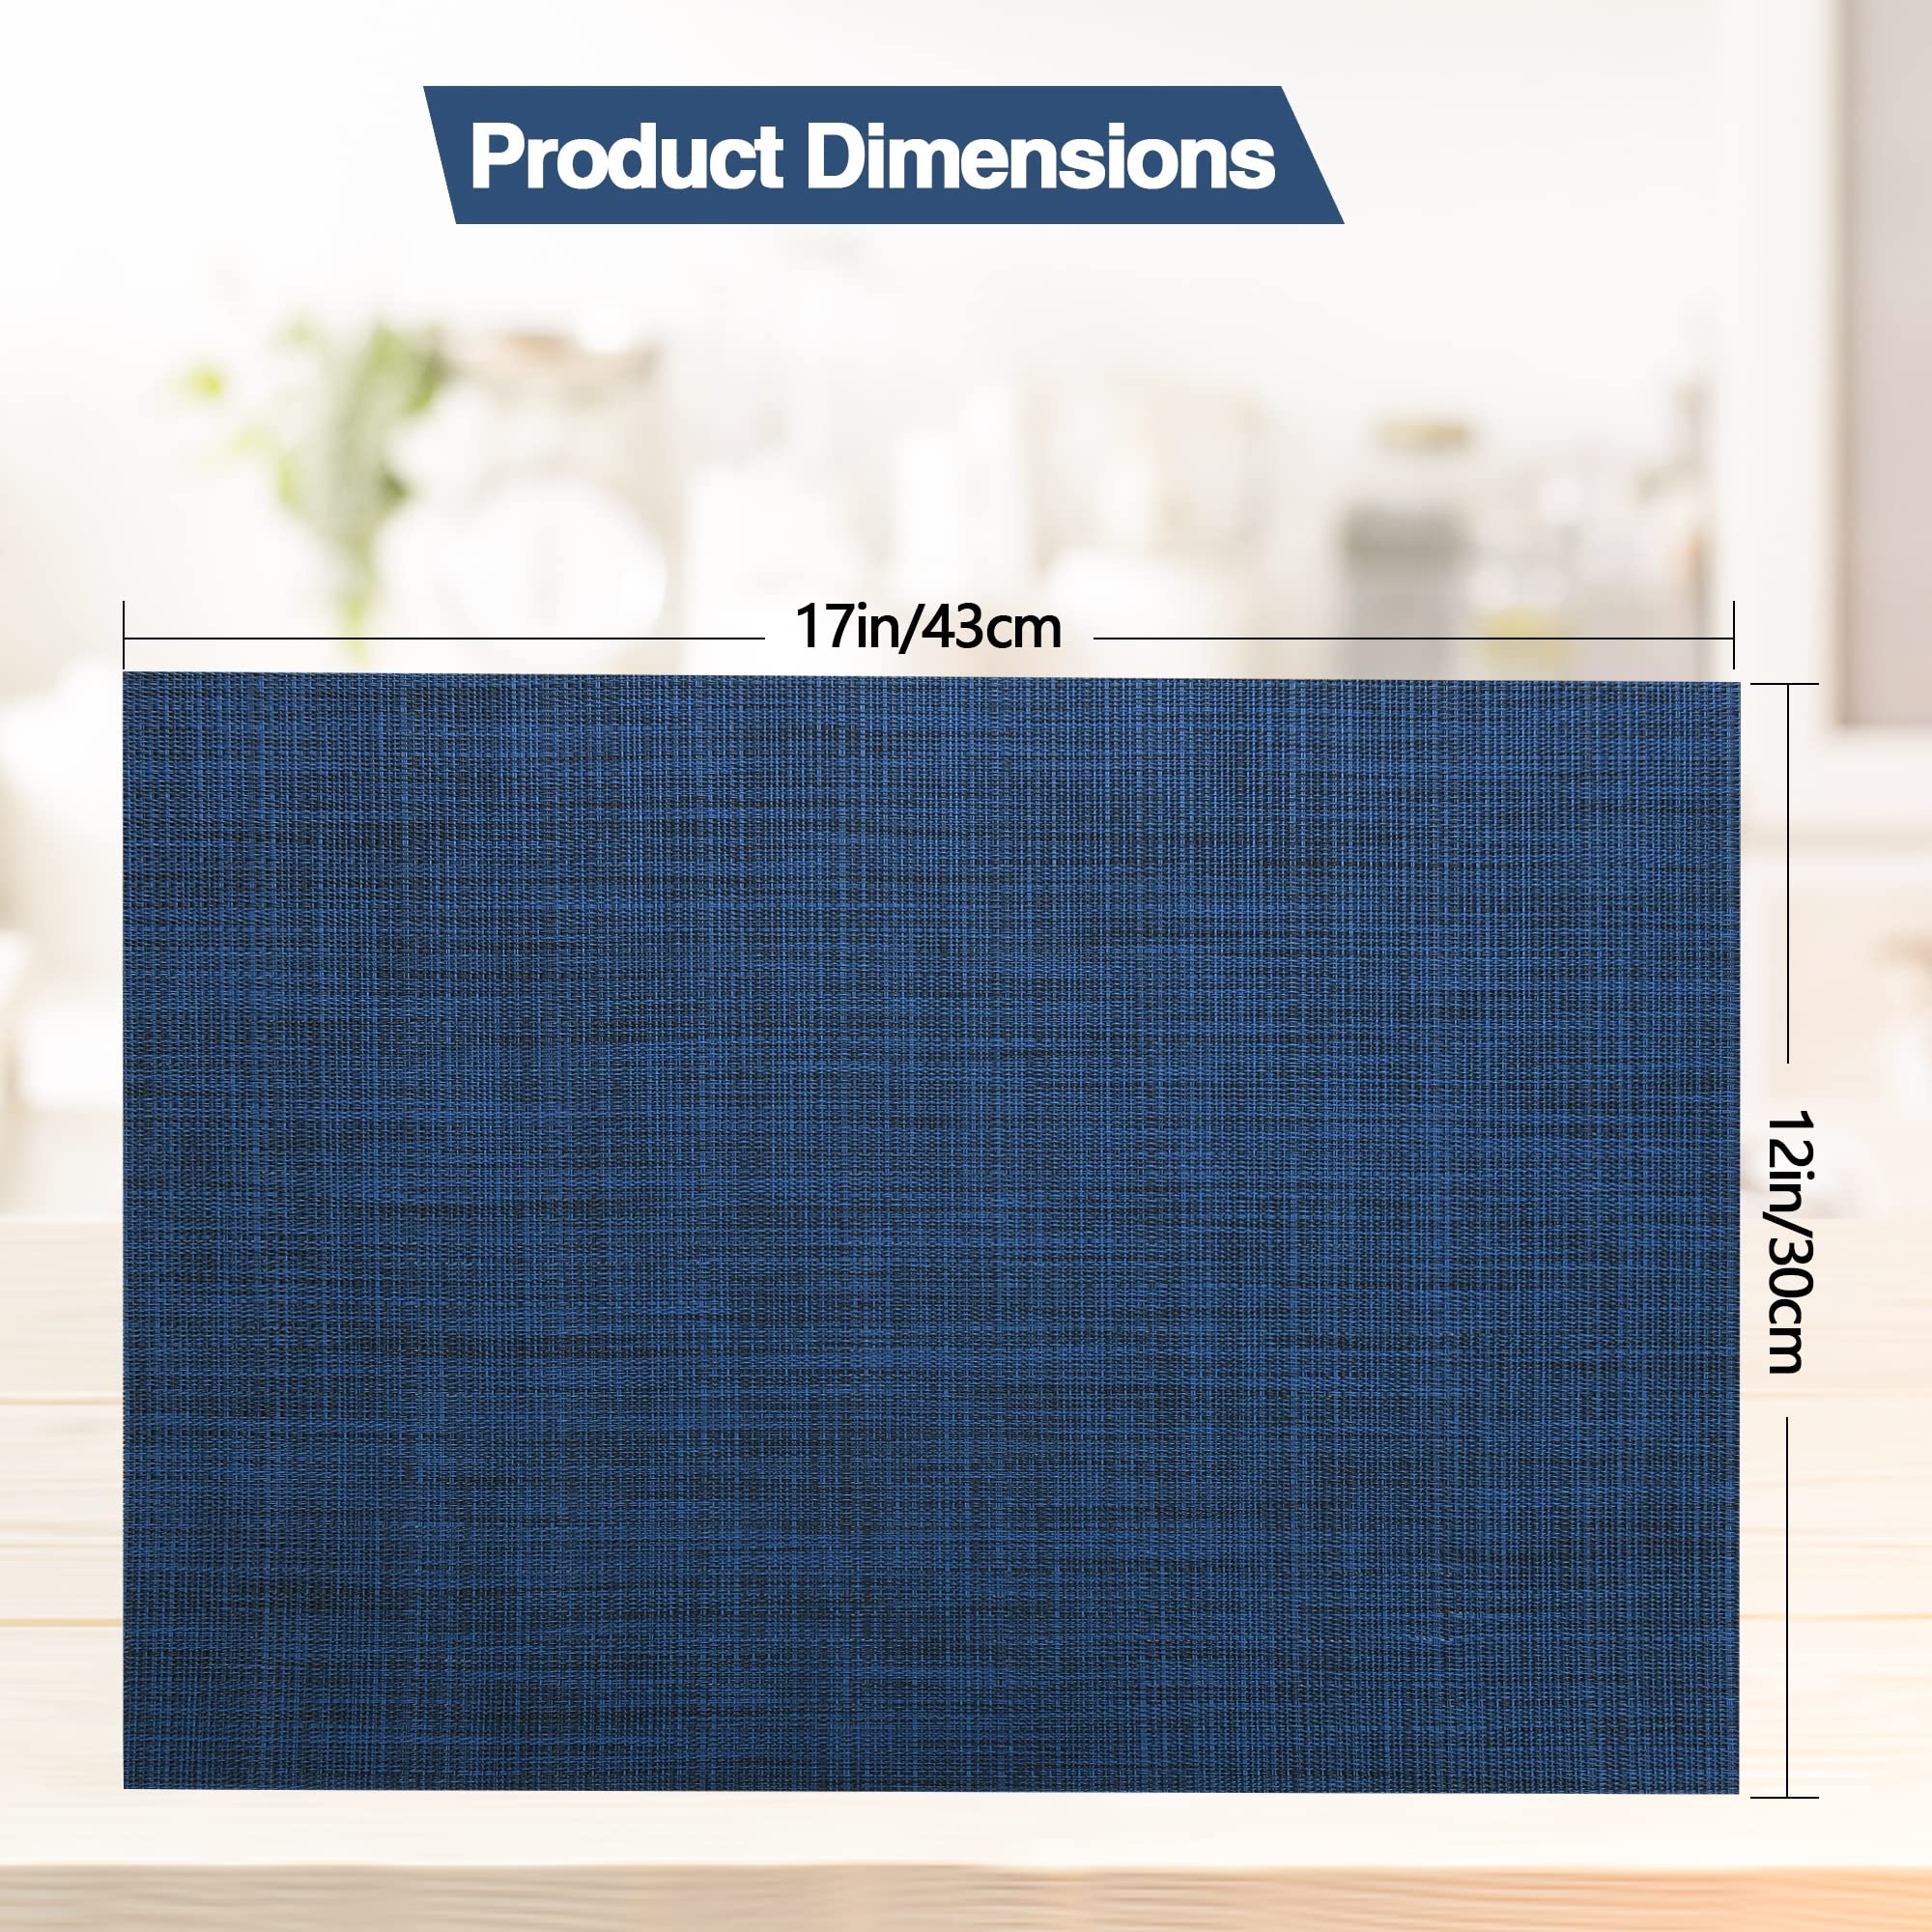 SLKQG Navy Blue Placemats Set of 4 - Easy Clean Washable Vinyl Placemats - Wipeable Heat Resistant Table Mats for Dining Table - 17x12 Inch (Navy Blue, 4)